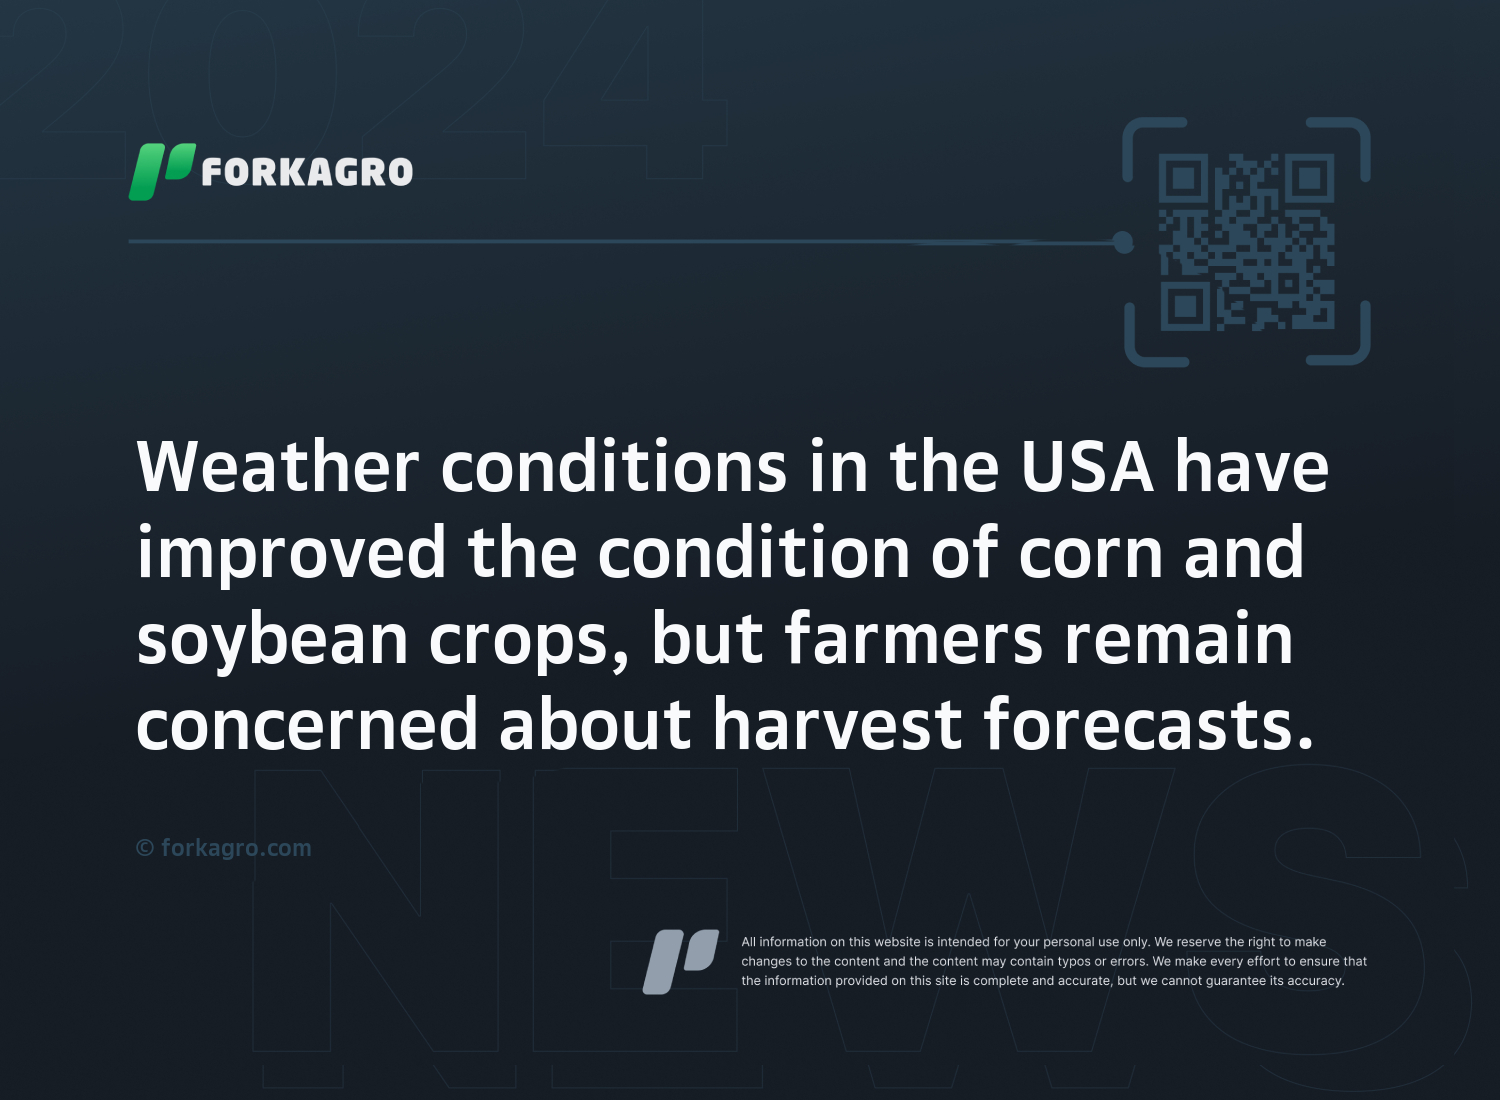 Weather conditions in the USA have improved the condition of corn and soybean crops, but farmers remain concerned about harvest forecasts.